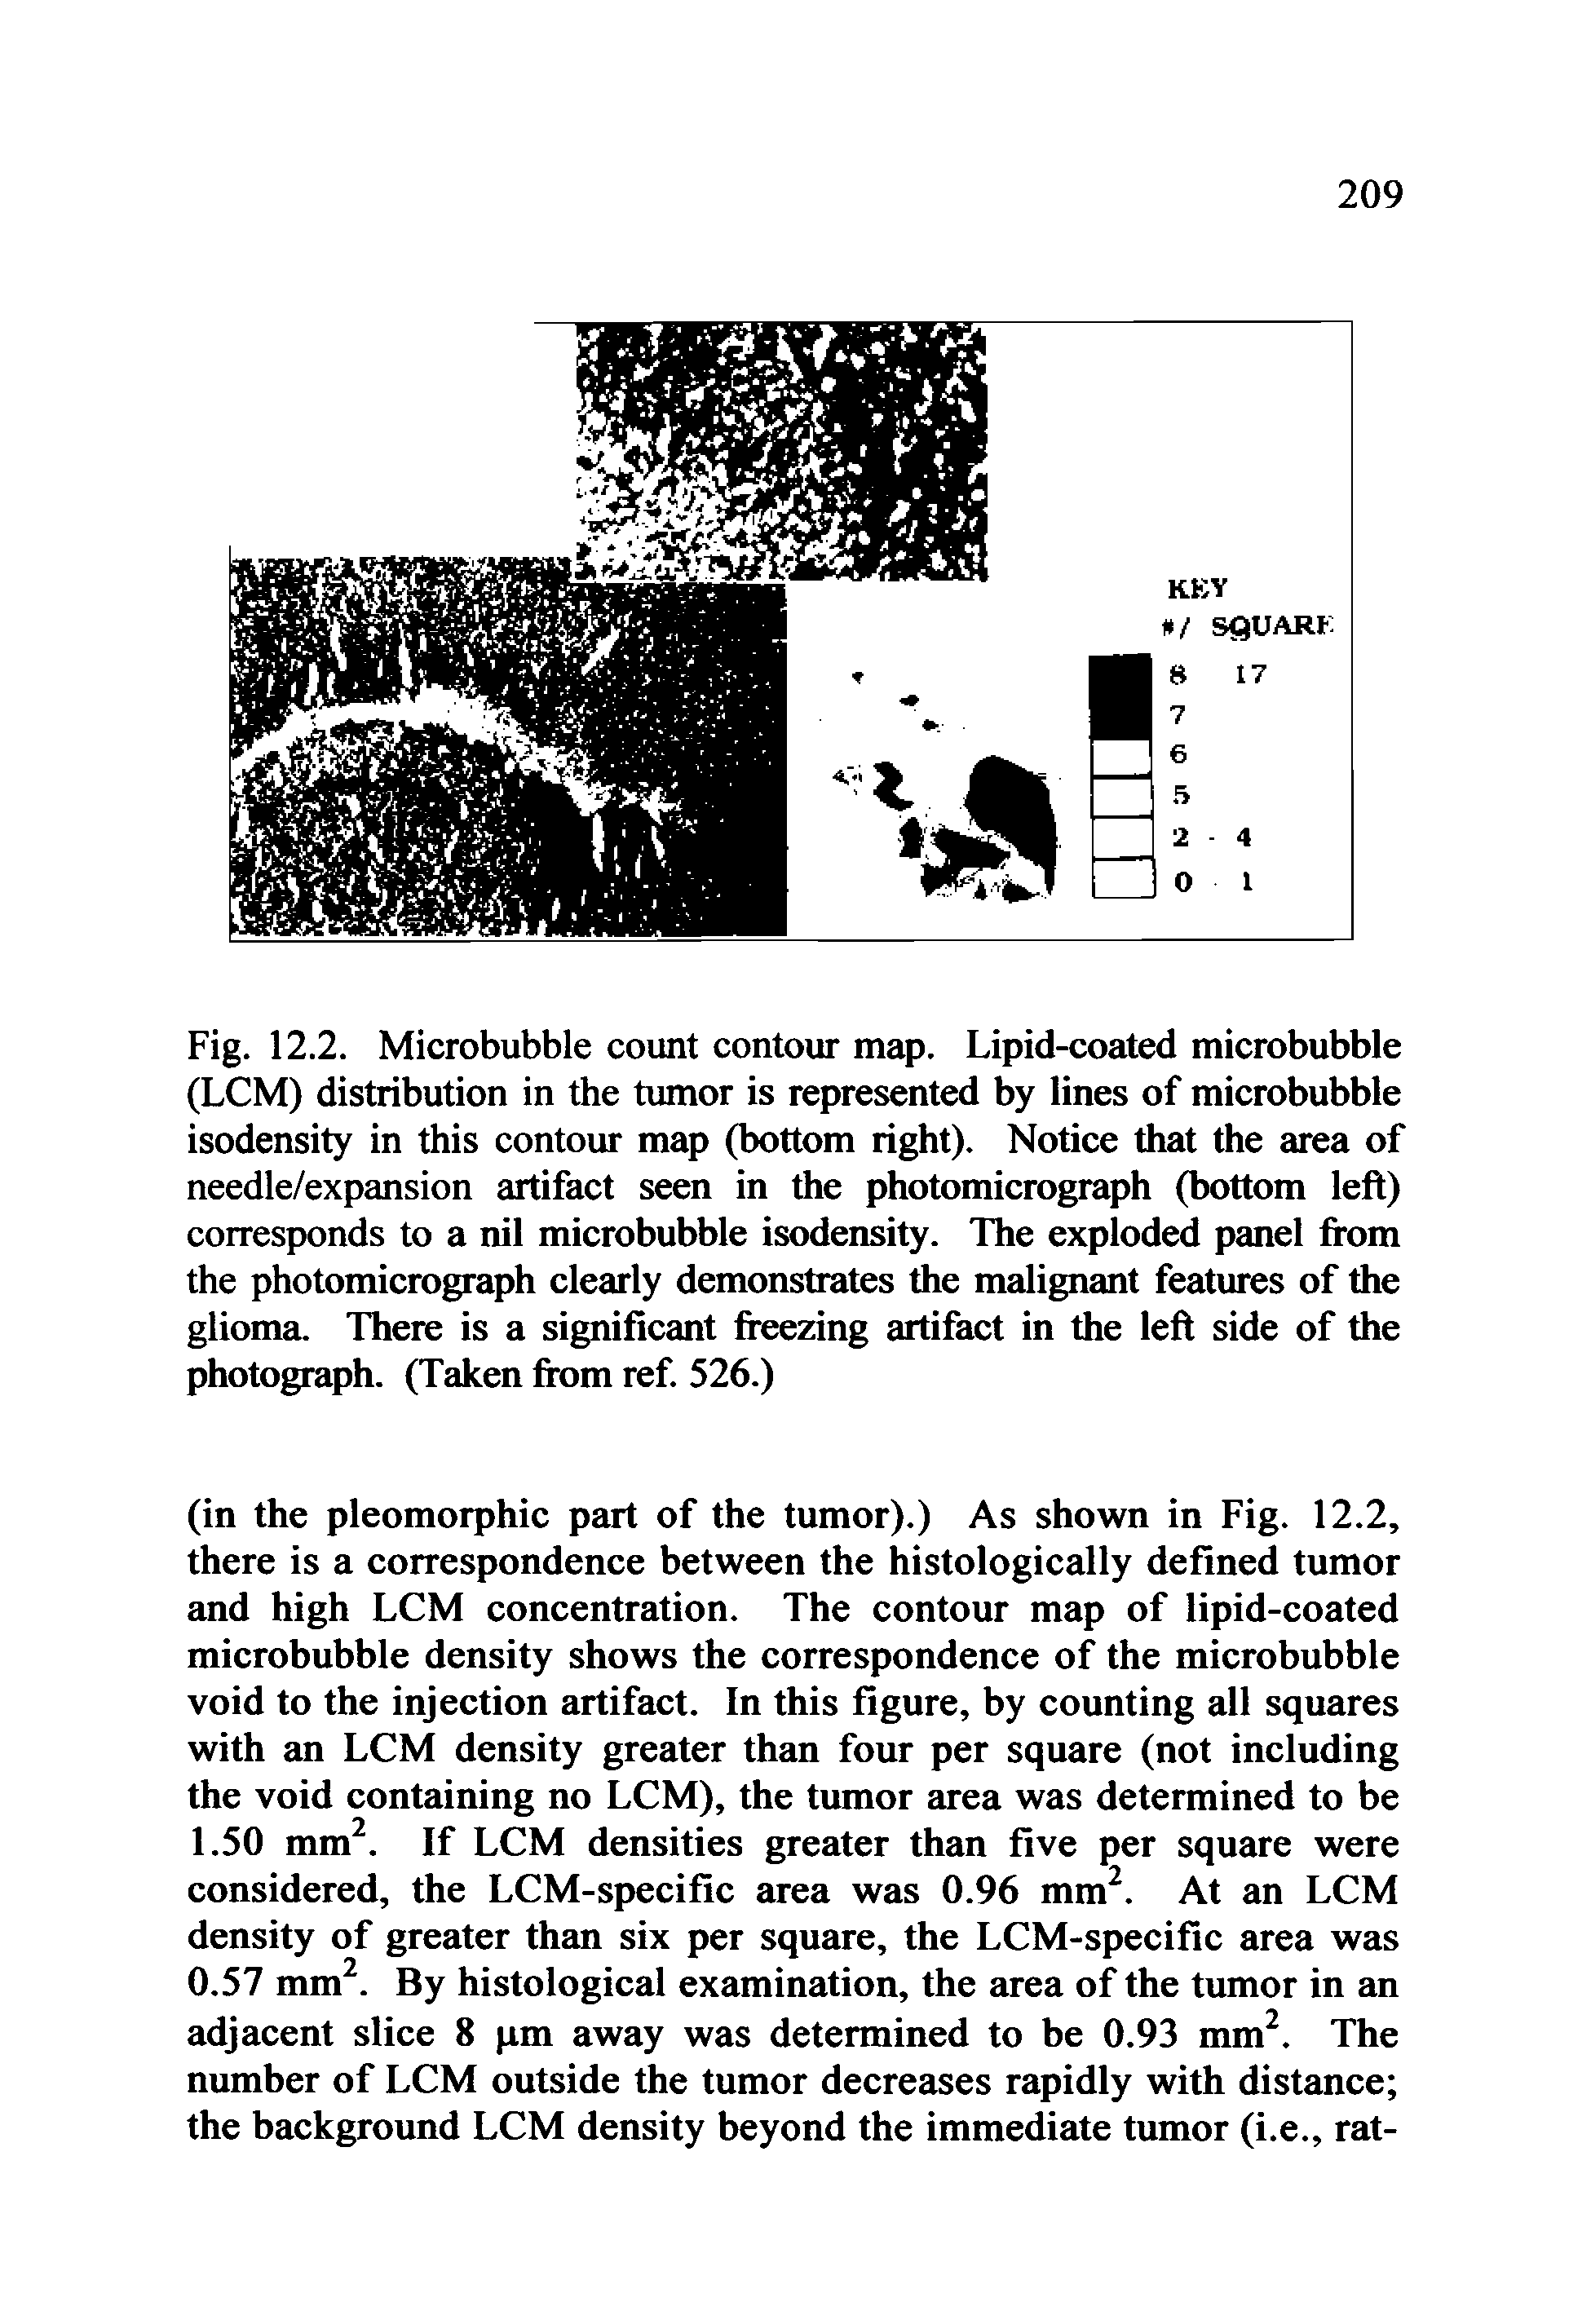 Fig. 12.2. Microbubble count contour map. Lipid-coated microbubble (LCM) distribution in the tumor is represented by lines of microbubble isodensity in this contour map (bottom right). Notice that the area of needle/expansion artifact seen in the photomicrograph (bottom left) corresponds to a nil microbubble isodensity. The exploded panel from the photomicrograph clearly demonstrates the malignant features of the glioma. There is a significant freezing artifact in the left side of the photograph. (Taken from ref. 526.)...